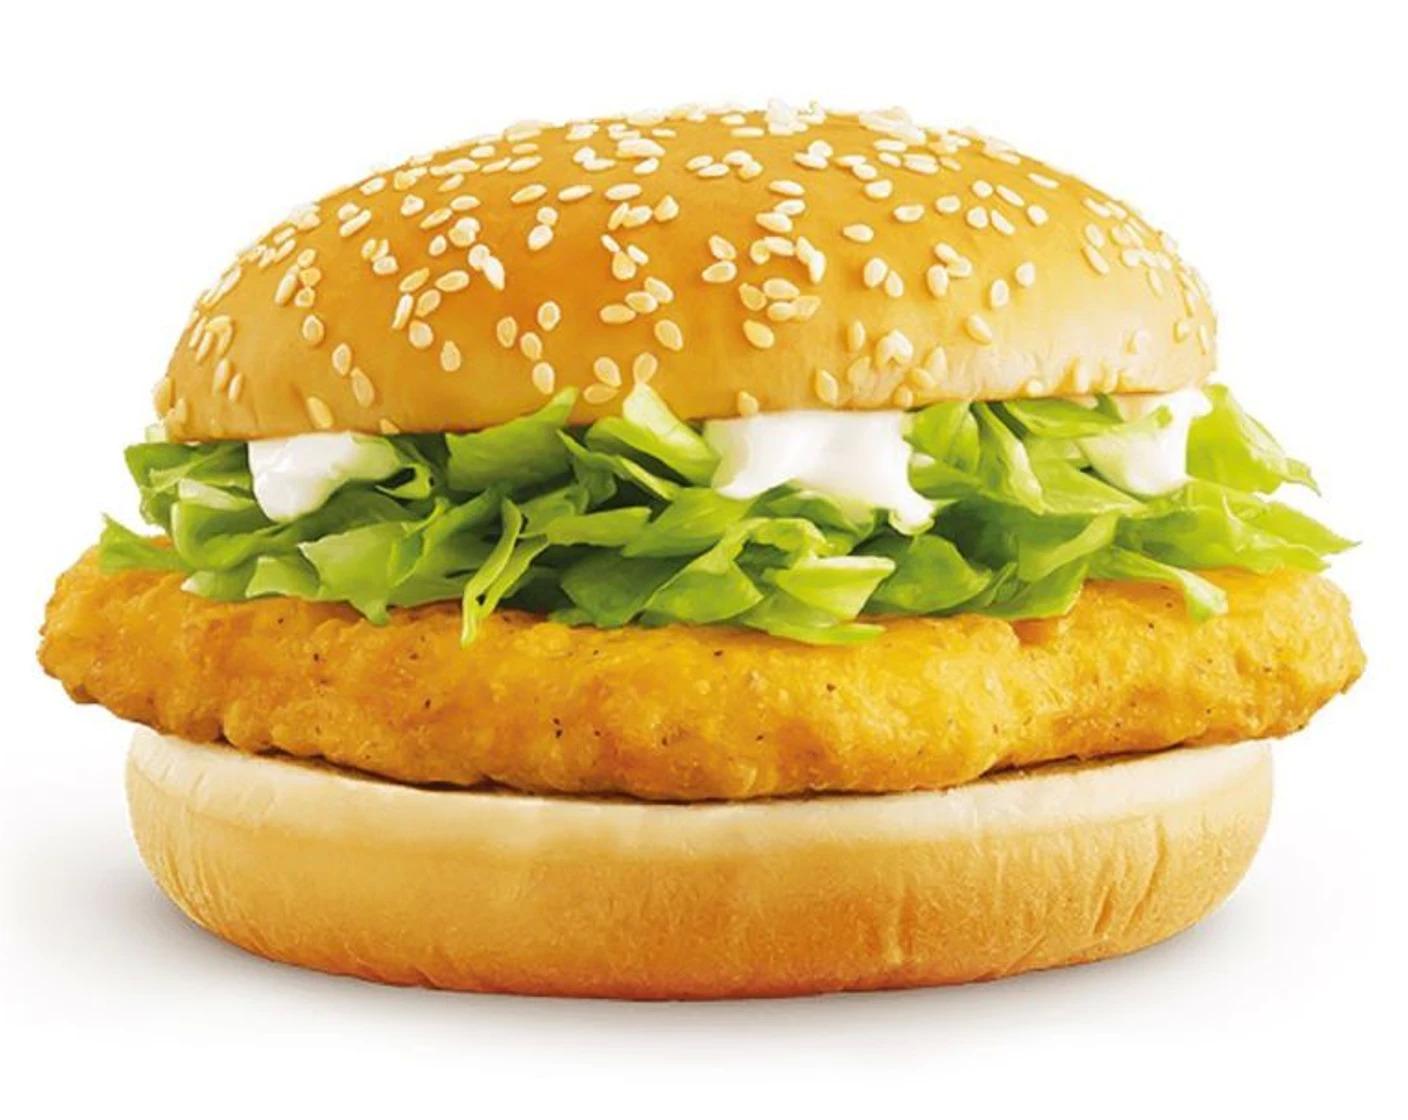 Free McChicken Sandwich at McDonalds Today 5/10 with App